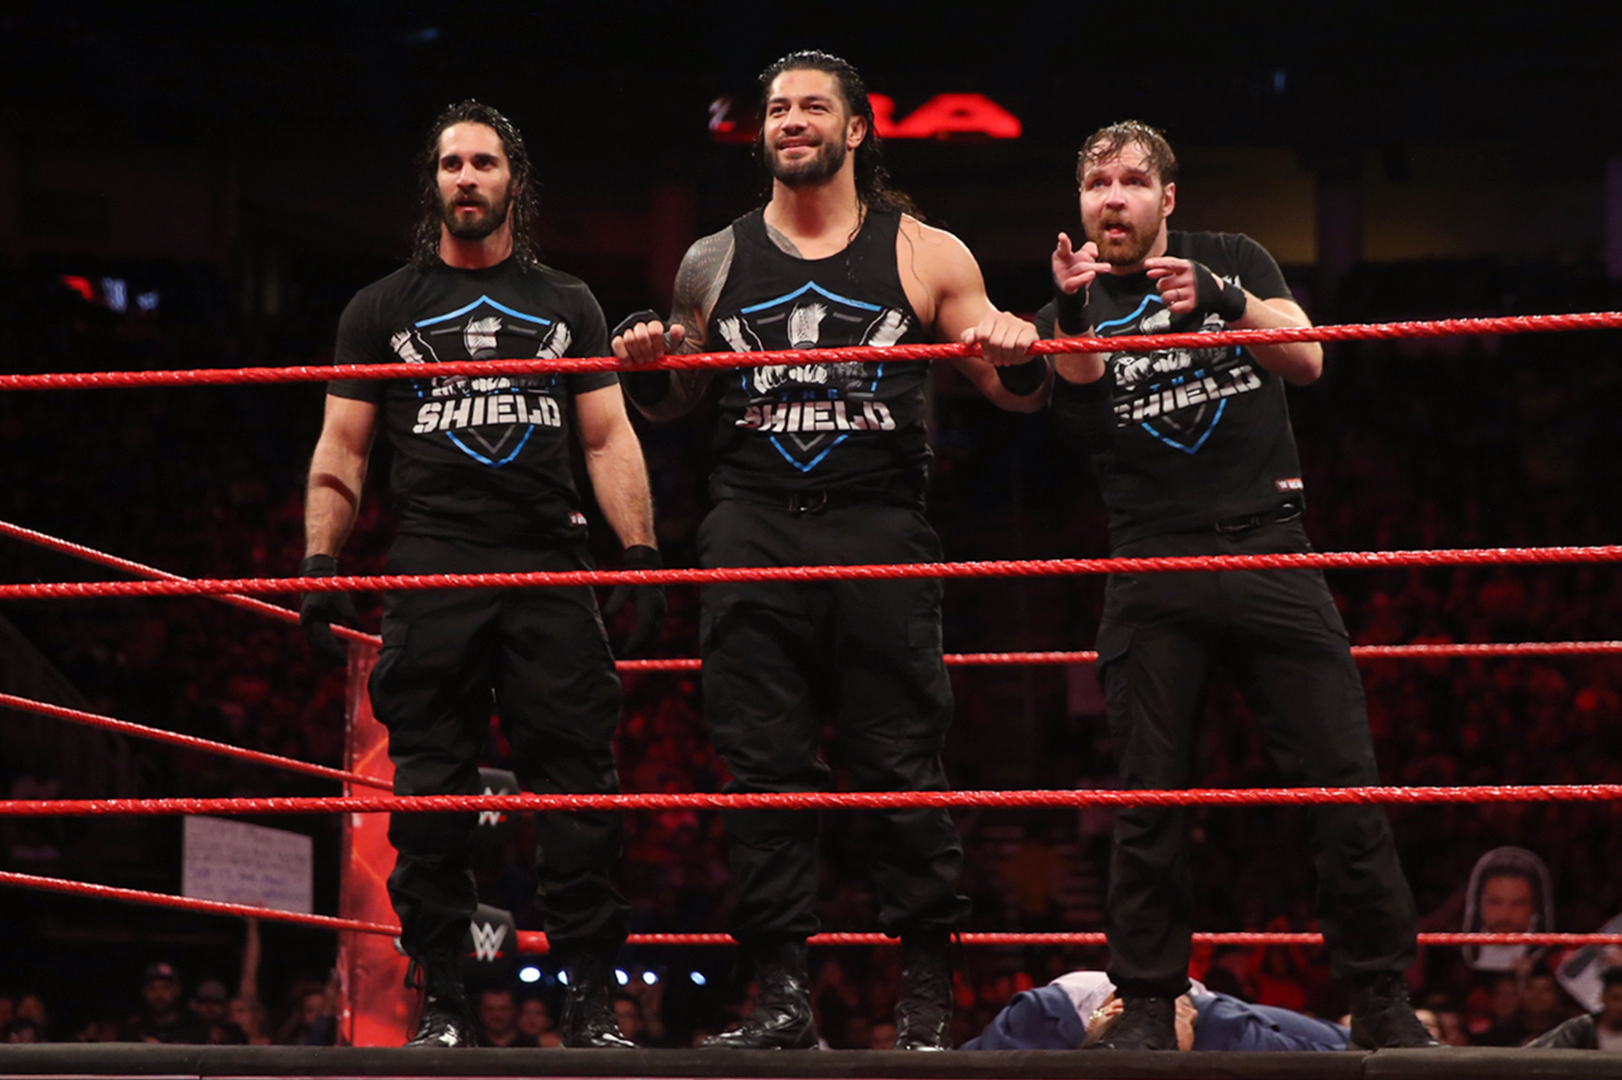 Wwe Raw Results Winners Grades Reaction And Highlights From November Bleacher Report Latest News Videos And Highlights